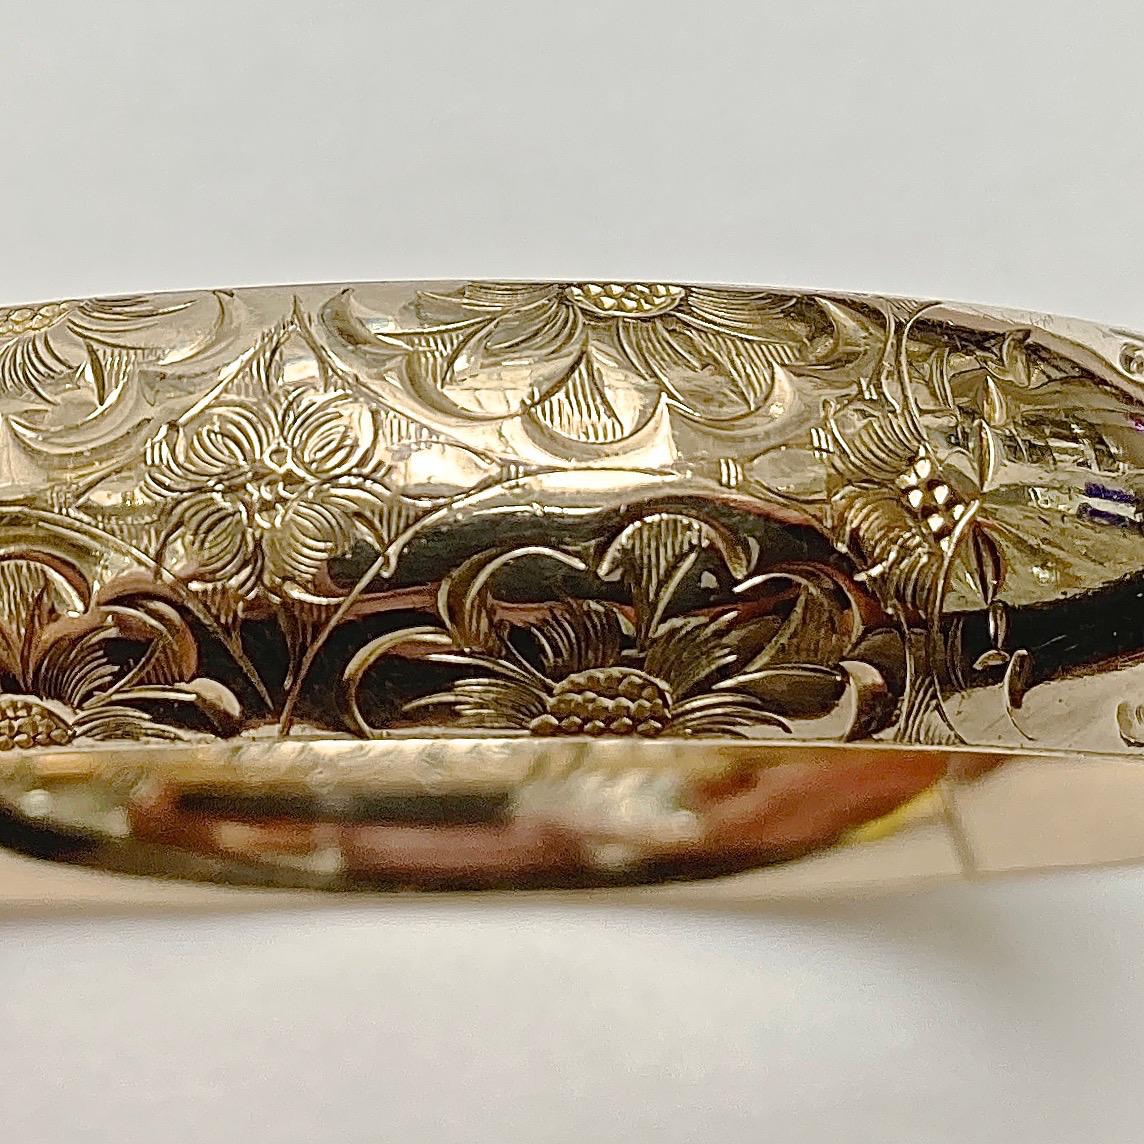 JFSS wonderful antique gold filled engraved bangle bracelet.  It opens with a push button and has an internal bar for strength.  The bangle is slightly oval, the inside measurements are 5.8m / 2.28 inches by 5.5cm / 2.1 inches, and the width is